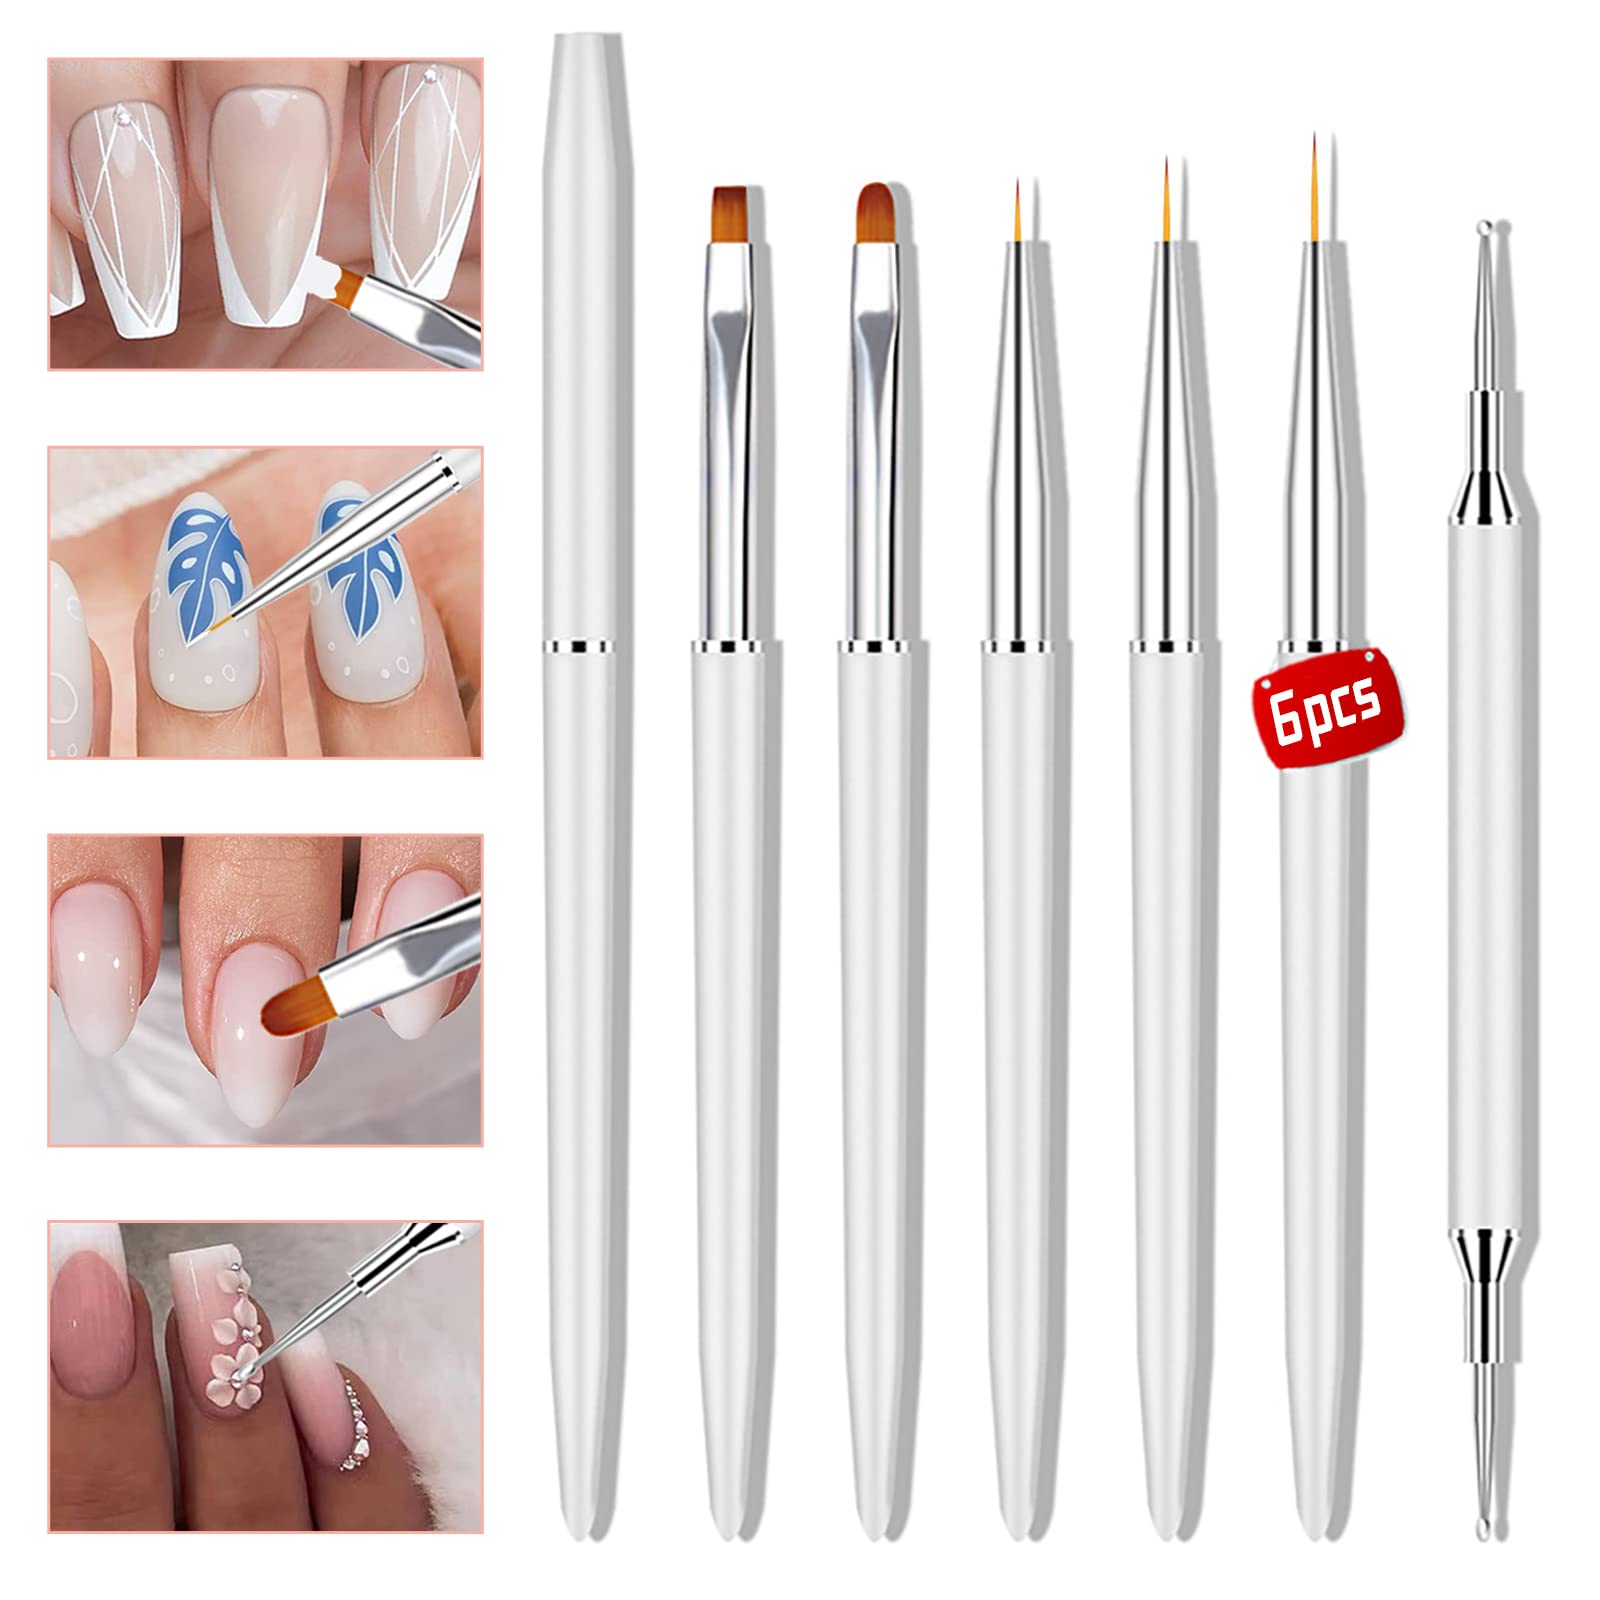 GLOWISH NAIL ART TOOL SET 10PCS/MANICURE SET STAINLESS STEEL UNIVERSAL HOME  OFFICE MANICURE SET NAIL CLIPPER NAIL CUTTER CLEANER GROOMING ALL IN ONE  NAIL CARE KIT - Price in India, Buy GLOWISH